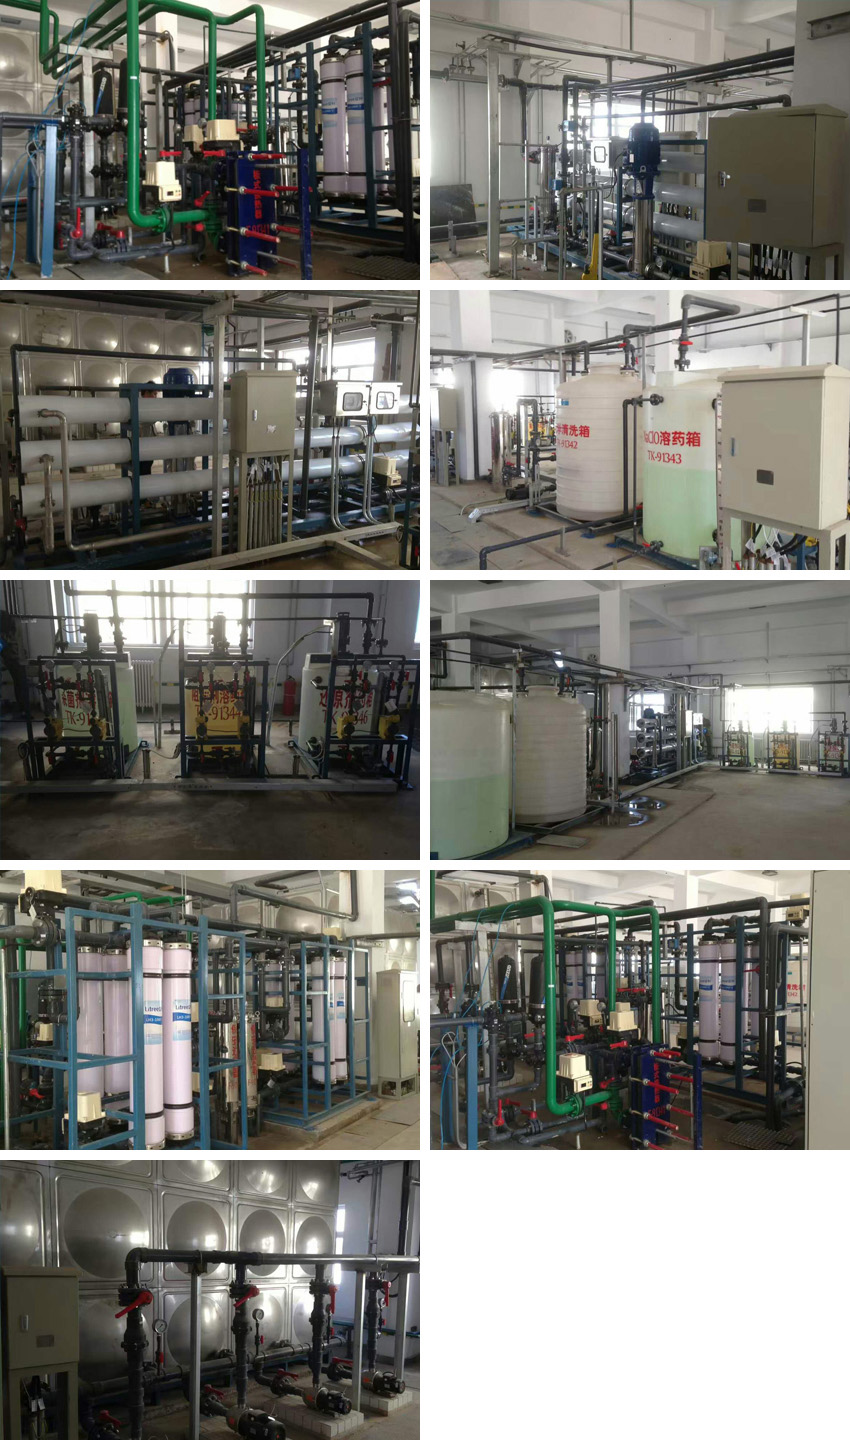 Yinchuan Ningxia ultrafiltration reverse osmosis water supply system